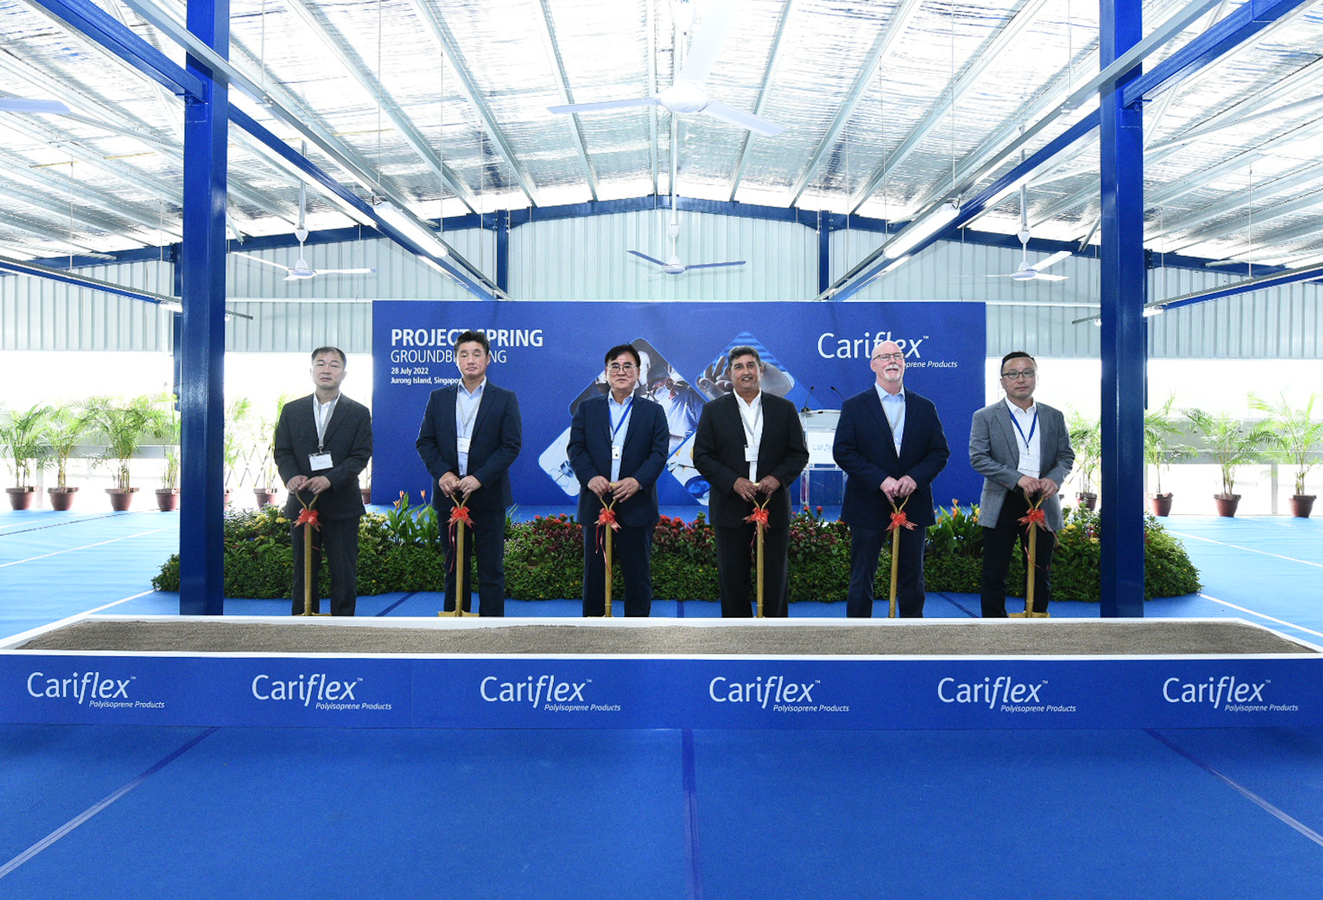 Cariflex’s management team at the plant’s ground-breaking ceremony held in July 2022.